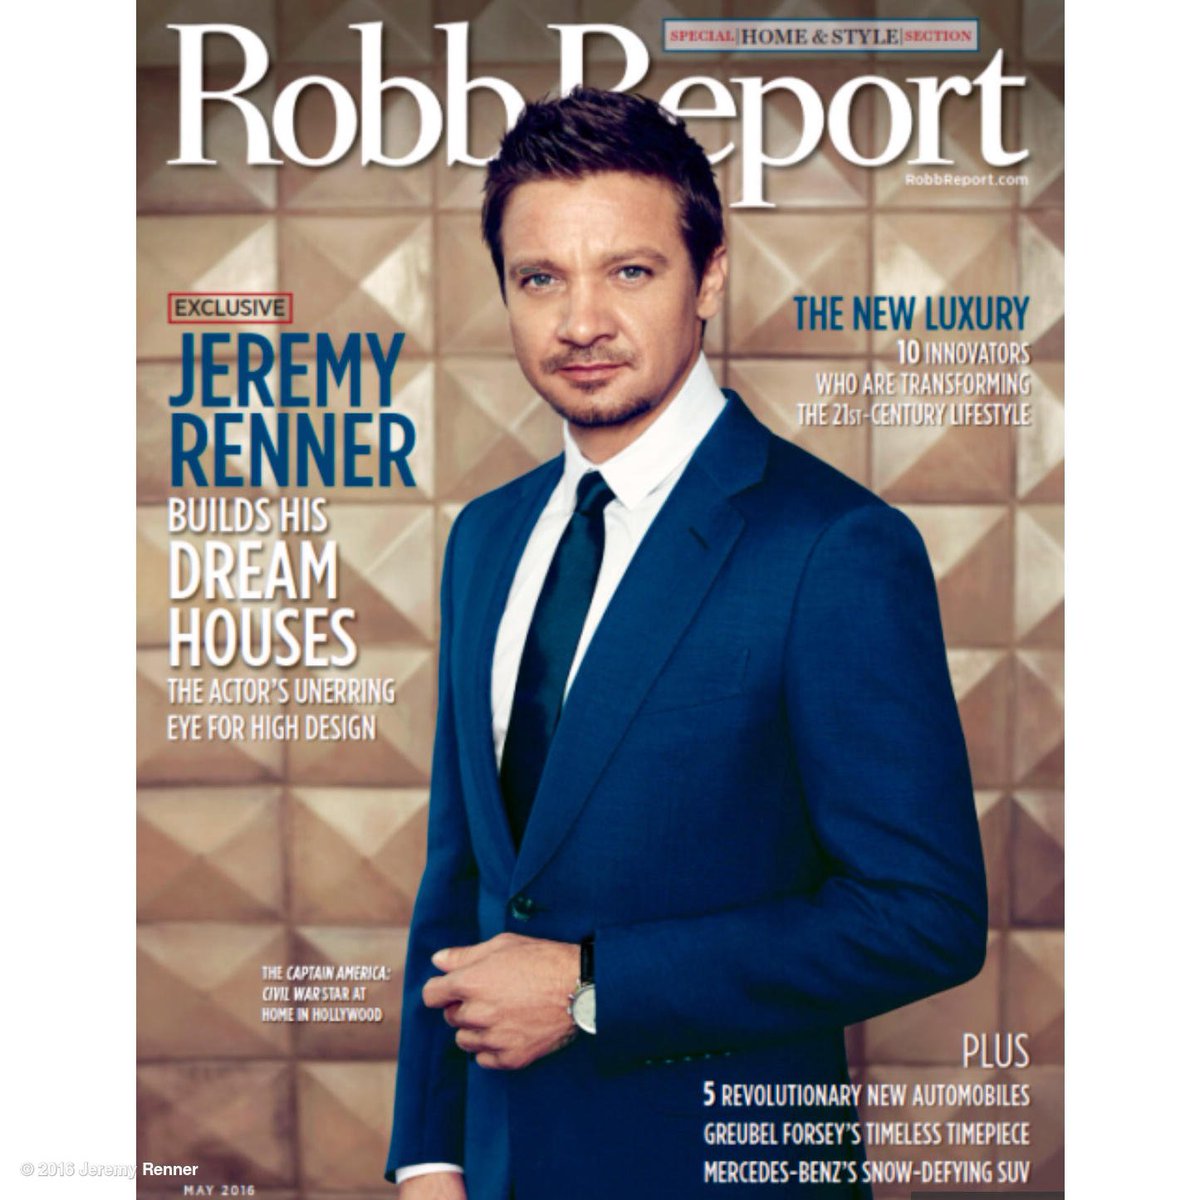 Thx @robbreport @randallslavin for the fun cover shoot. Anyone check it out? #architecture #cover #robbreport https://t.co/10XjFQBZMc